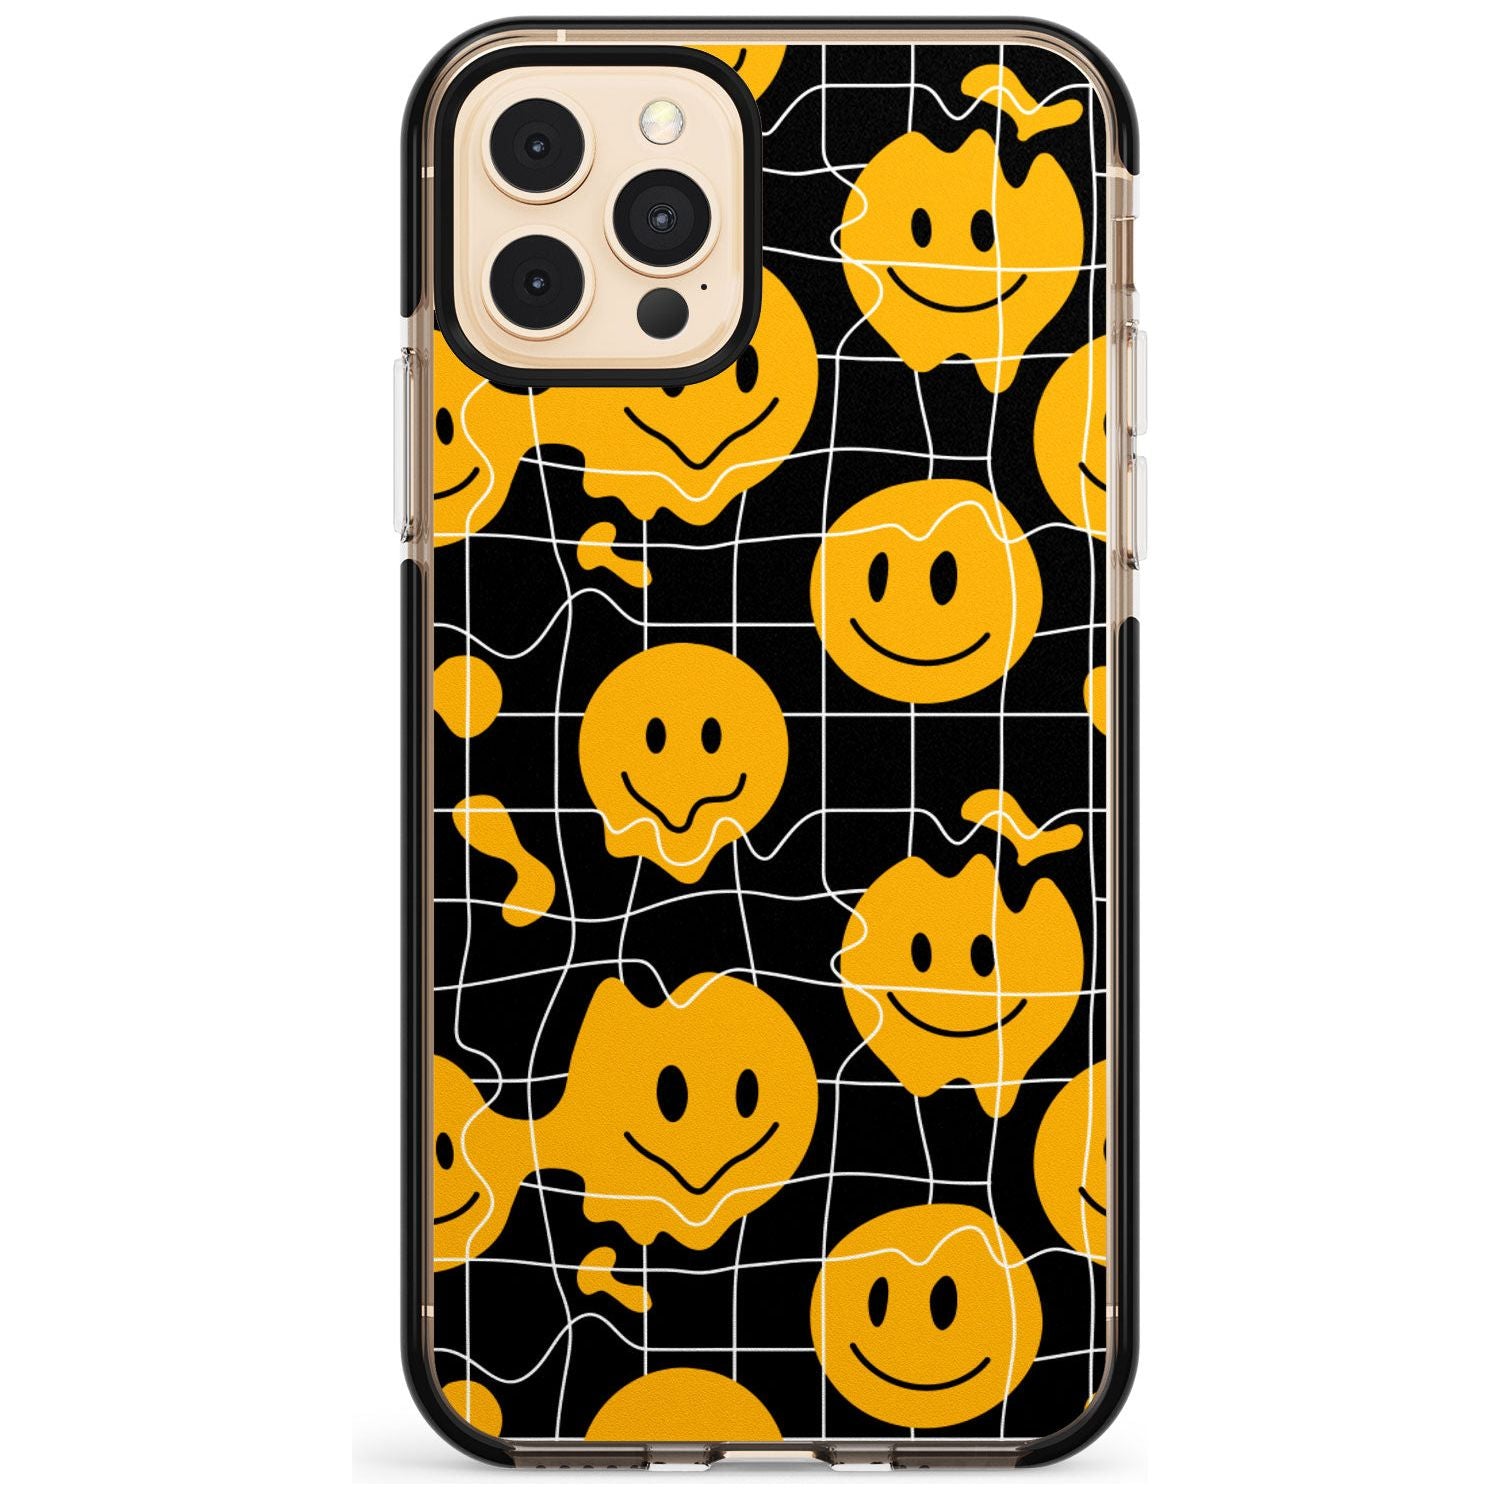 Acid Face Grid Pattern Black Impact Phone Case for iPhone 11